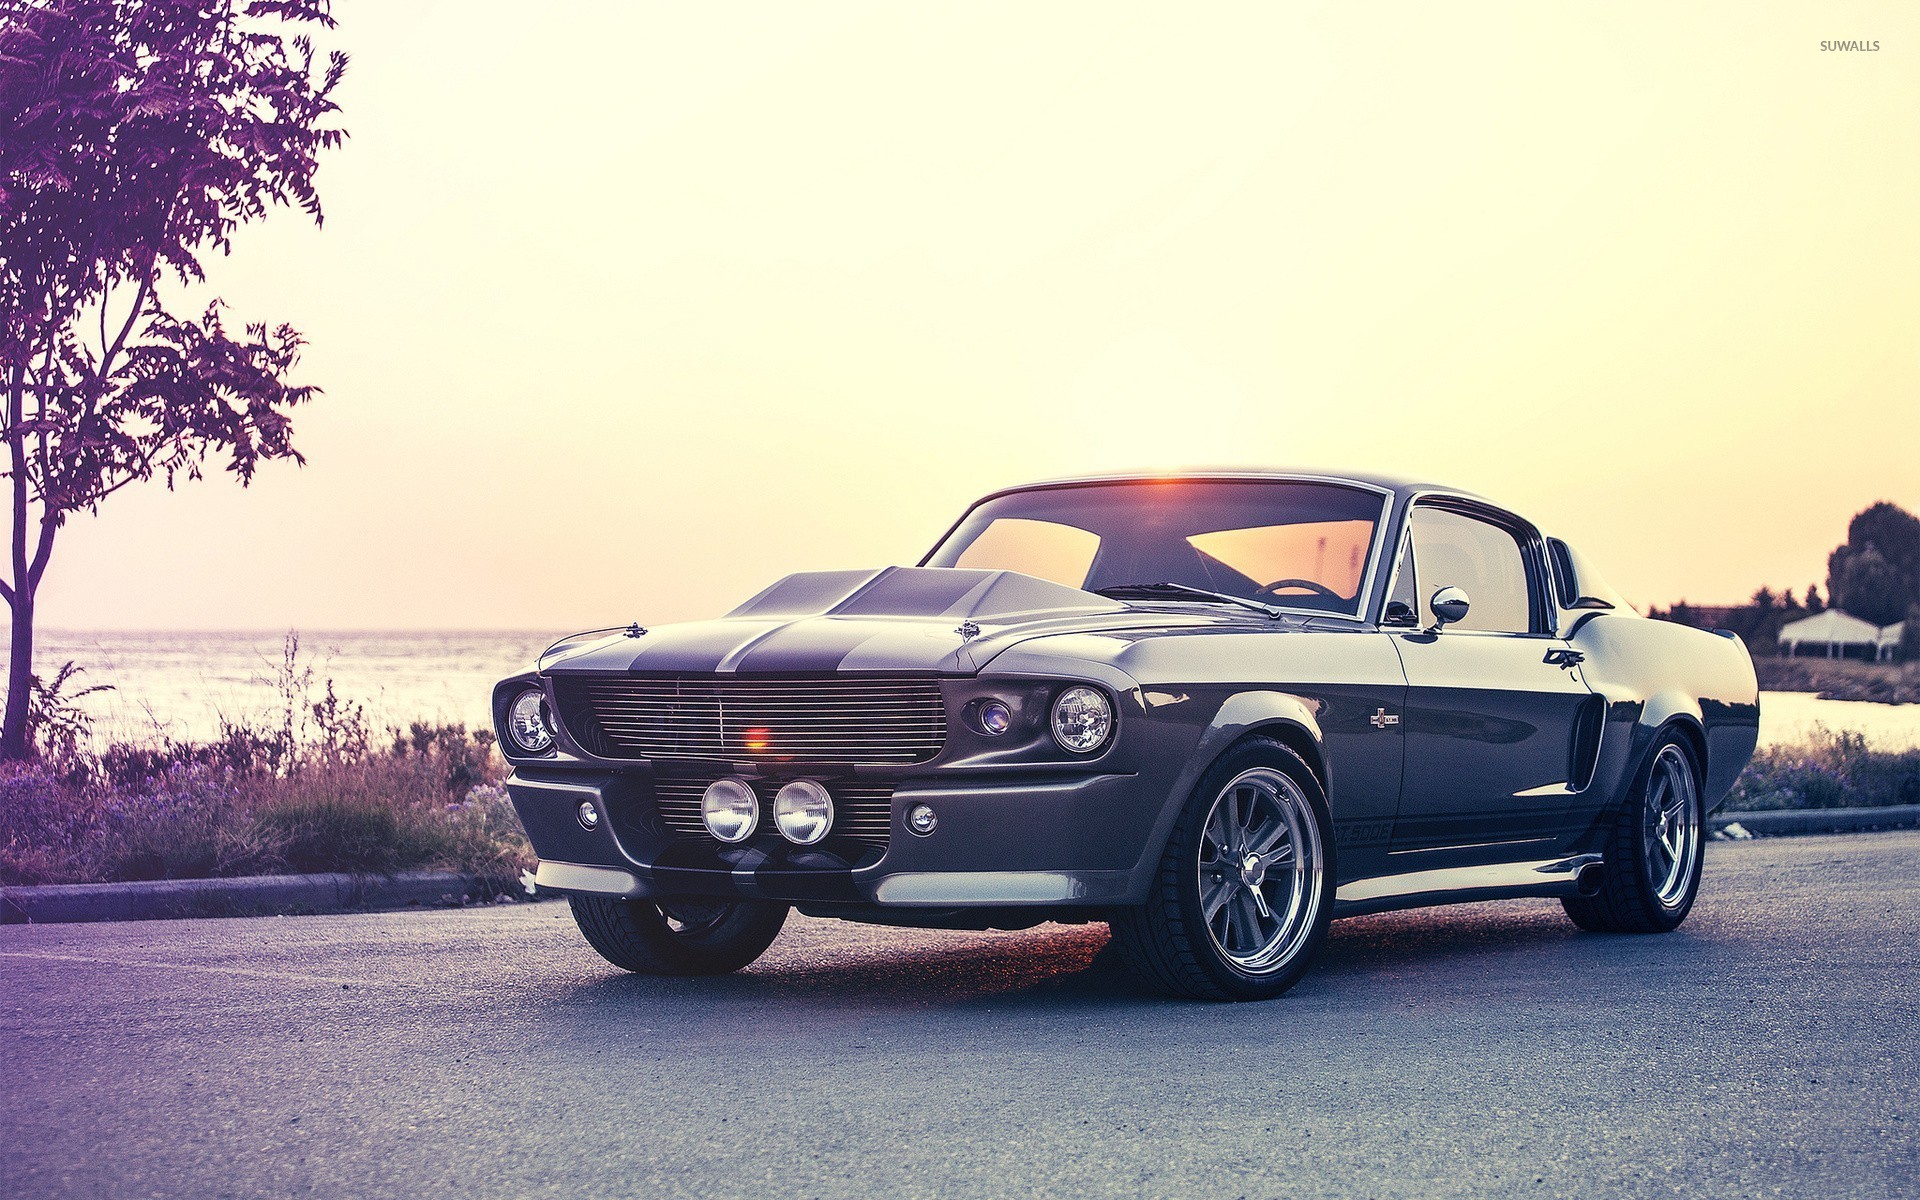 Ford Mustang Shelby Cobra Gt500 Eleanor Wallpaper Car